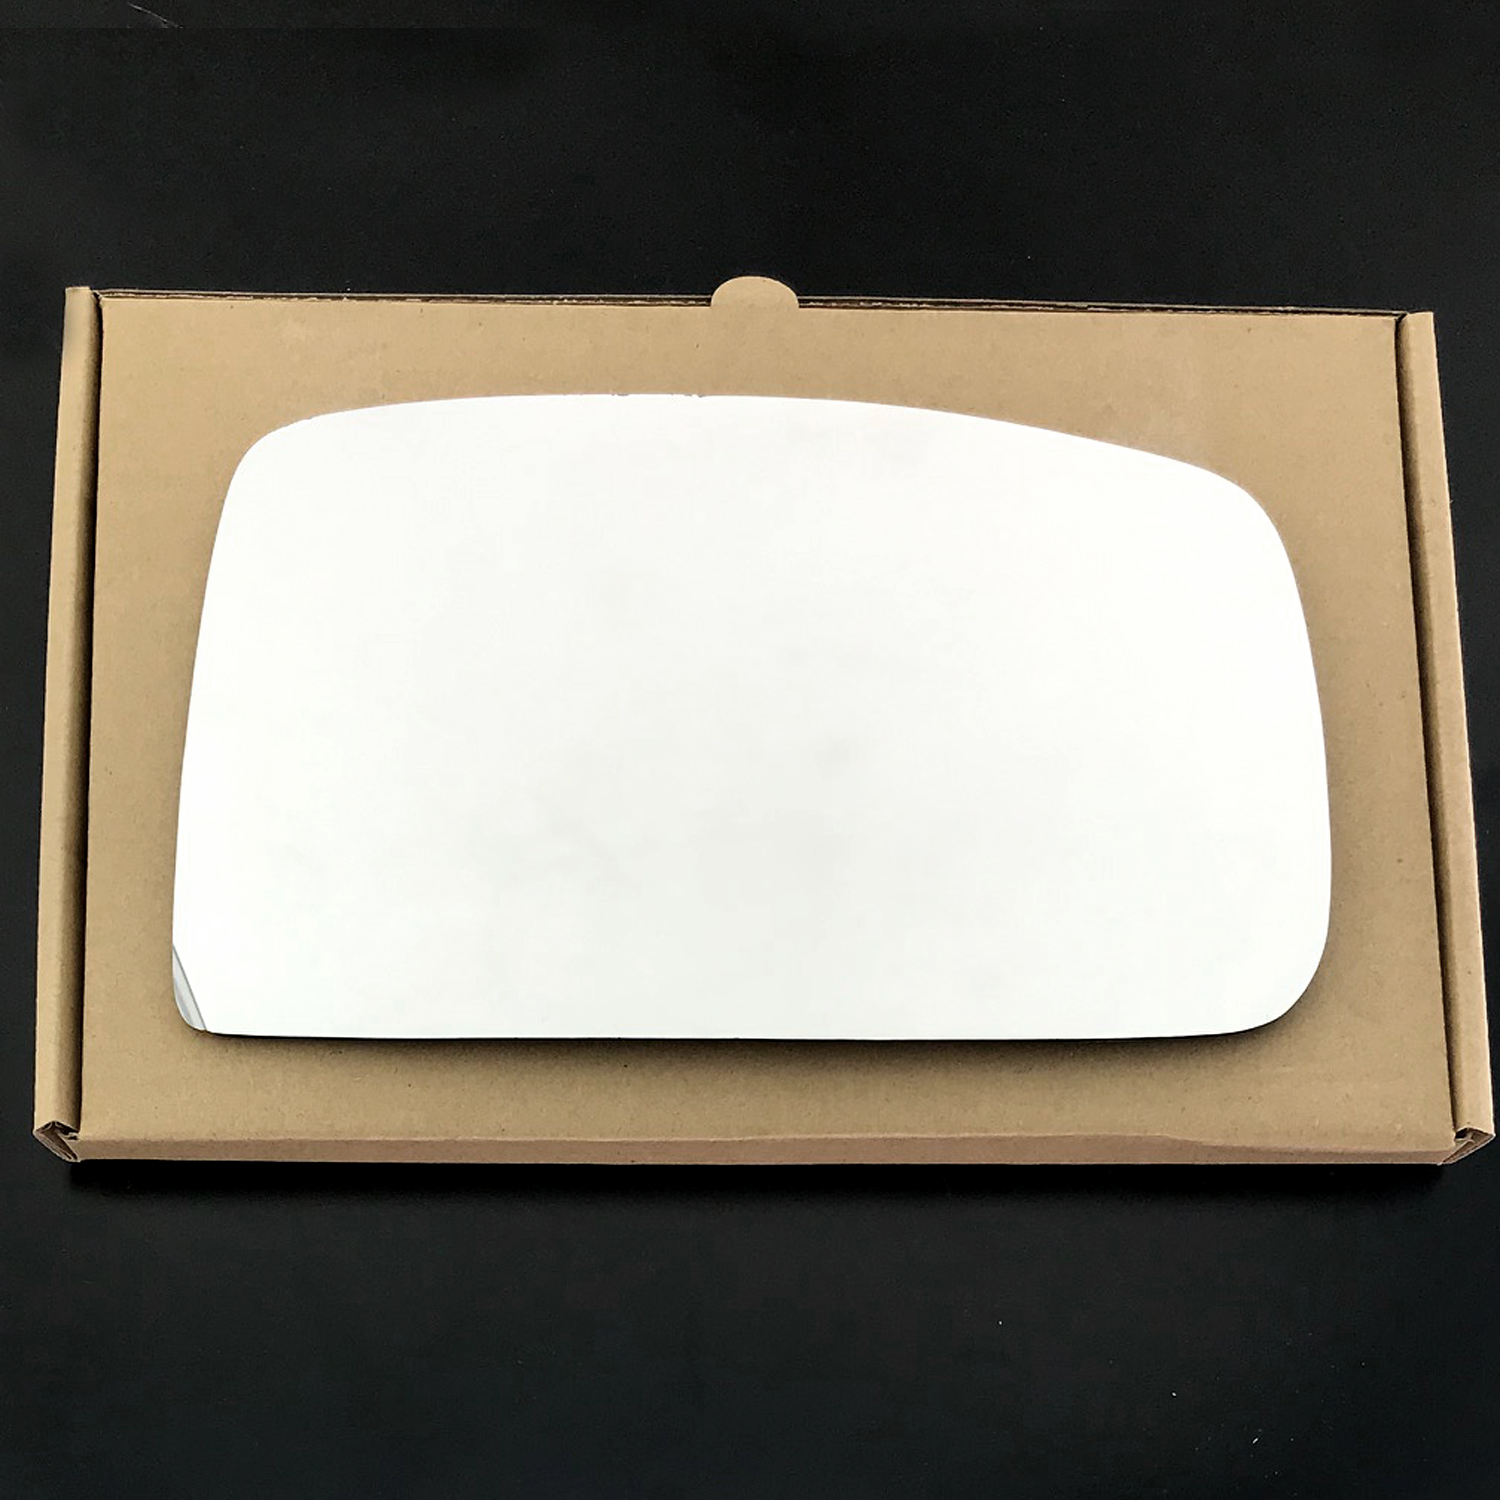 LDV Maxus Wing Mirror Glass LEFT HAND ( UK Passenger Side ) 2007 to 2018 – Convex Wing Mirror